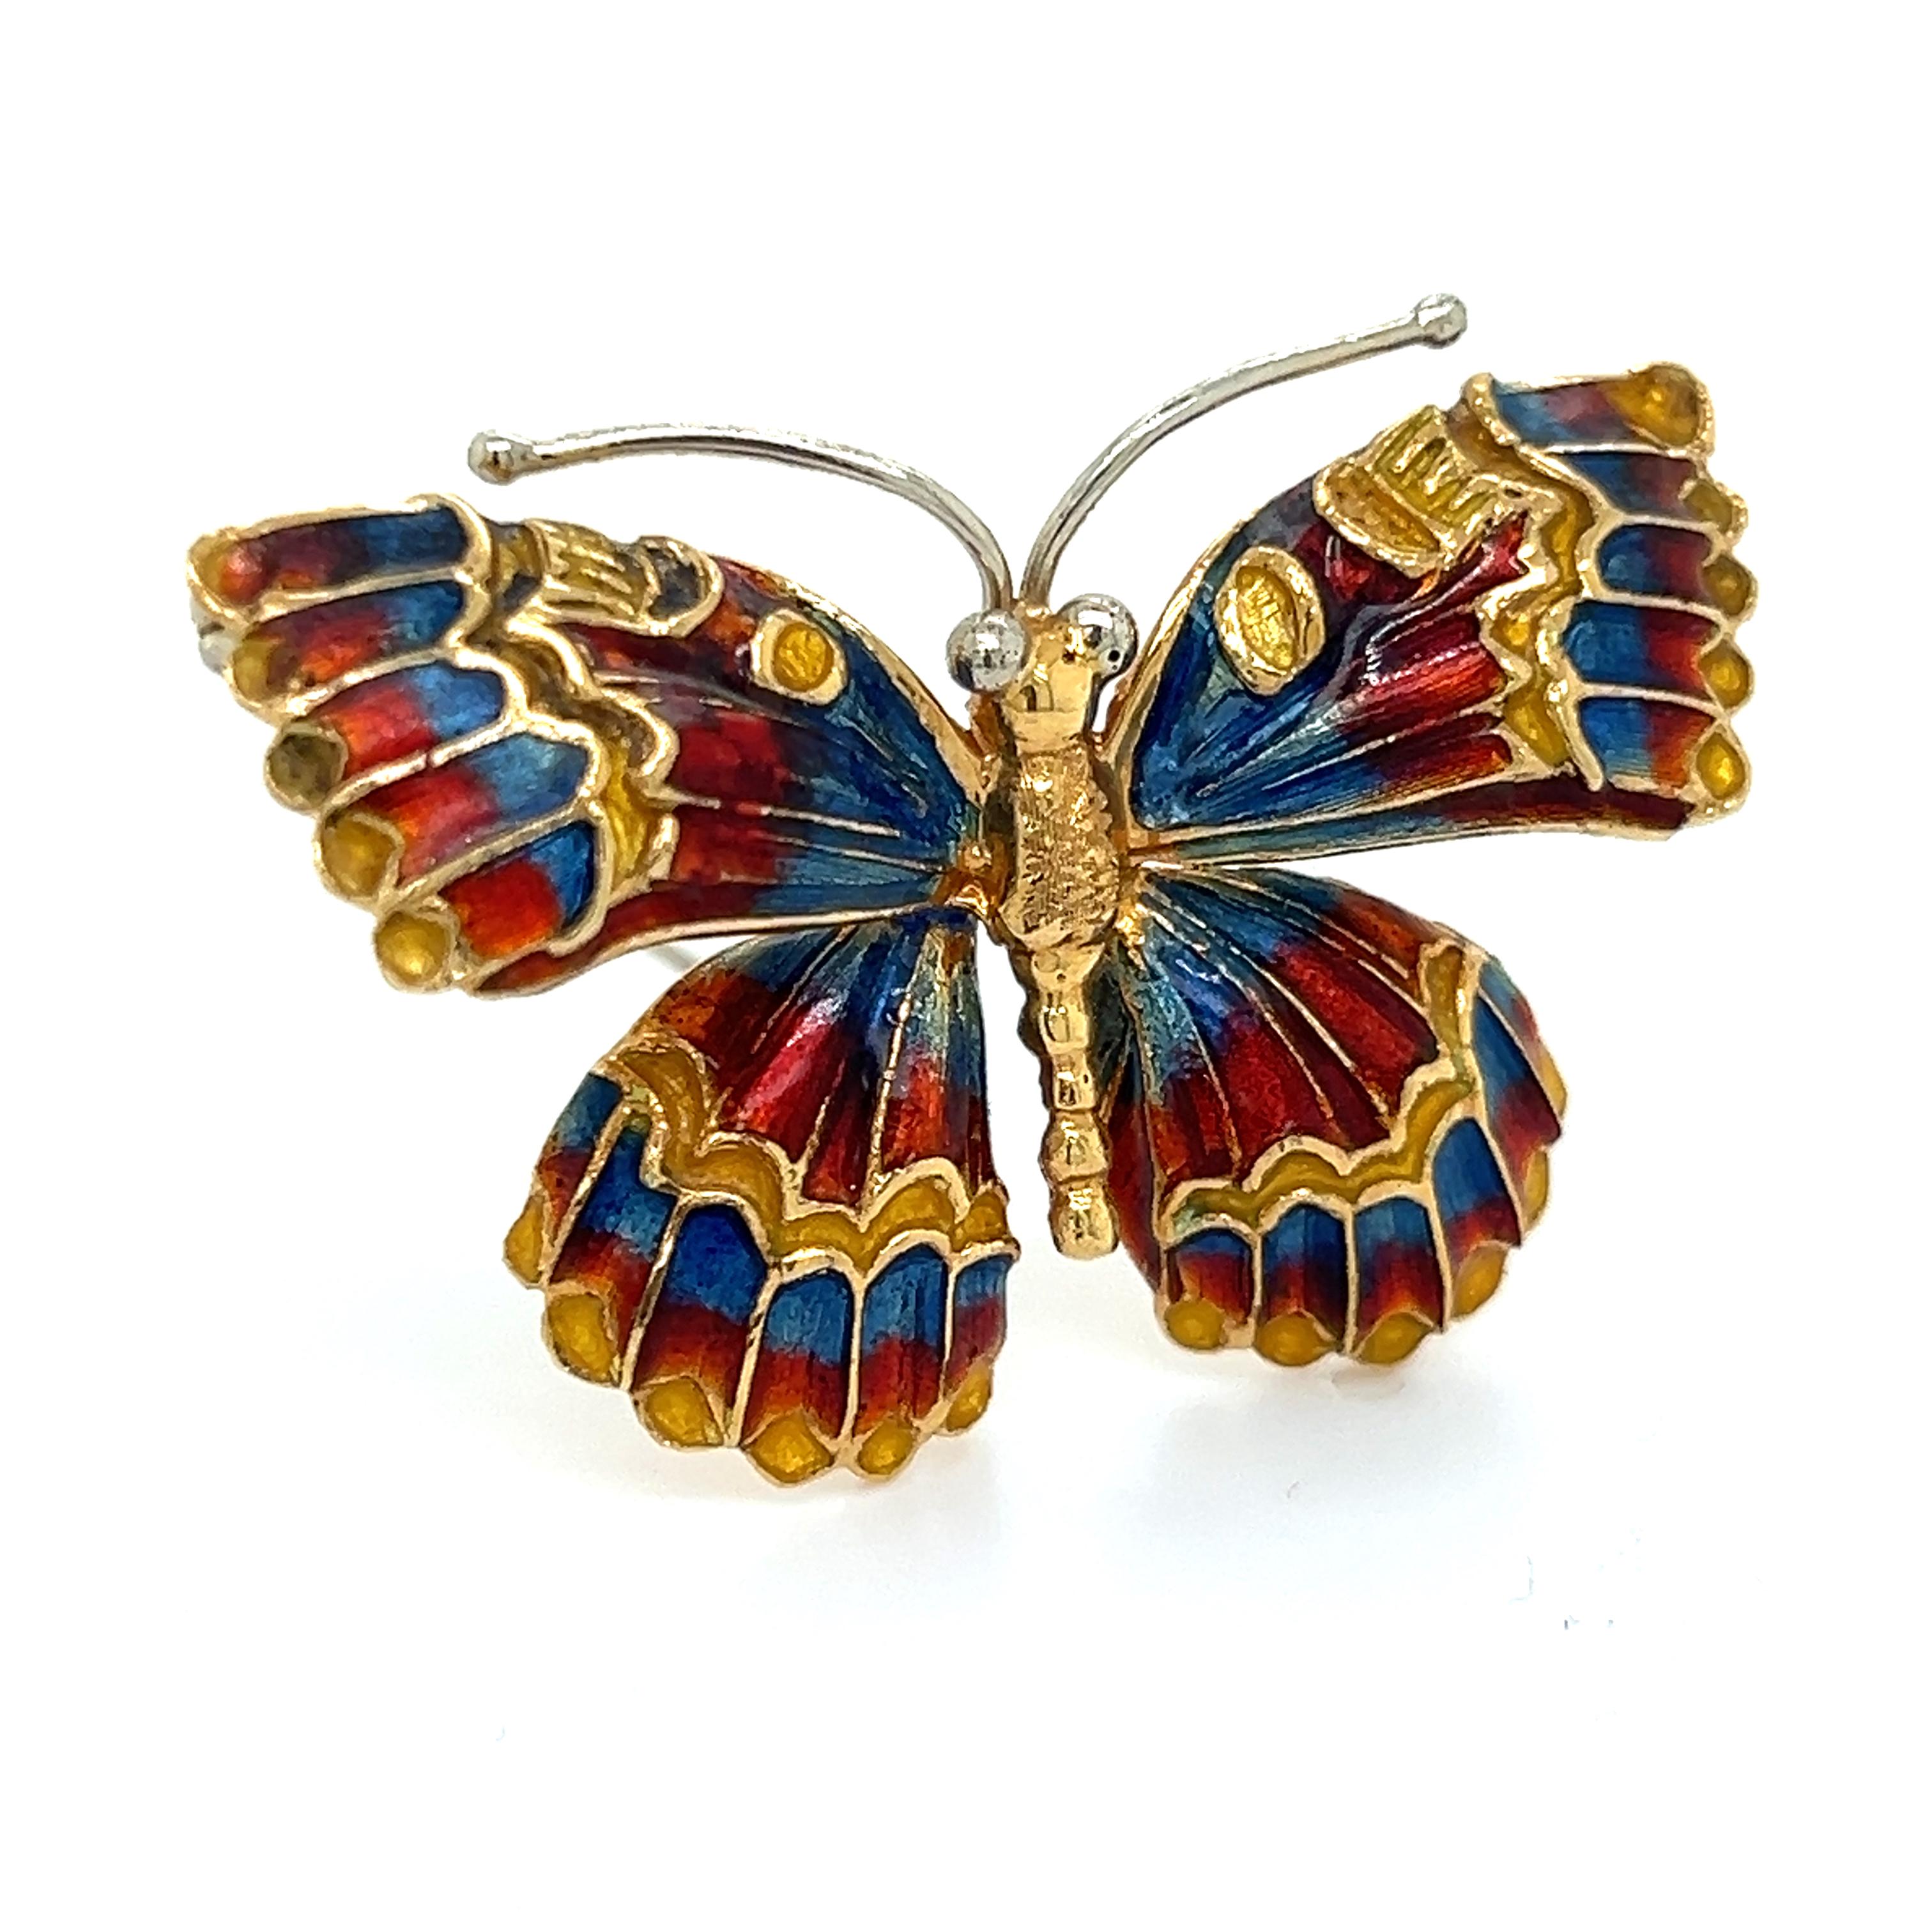 Beautiful brooch crafted in 18k yellow gold. The brooch is in  the form of a butterfly with exquisite detail throughout. The brooch is highlighted with vibrant colored enamel that pops off the design. Electric shades of orange, red, blue and yellow